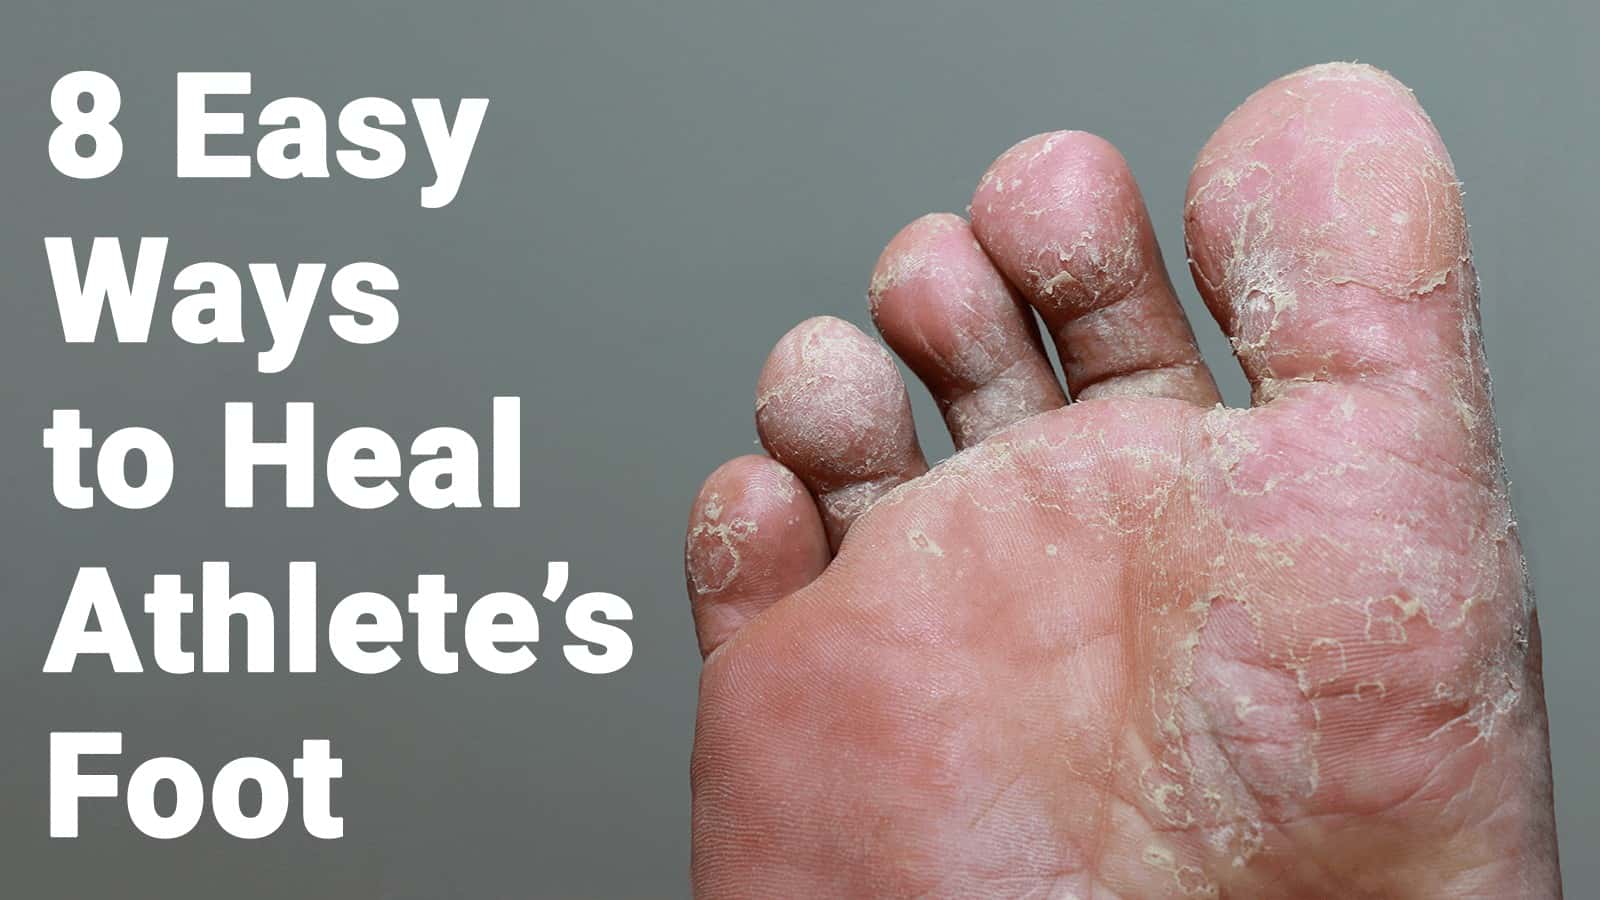 8 Easy Ways to Heal Athlete’s Foot